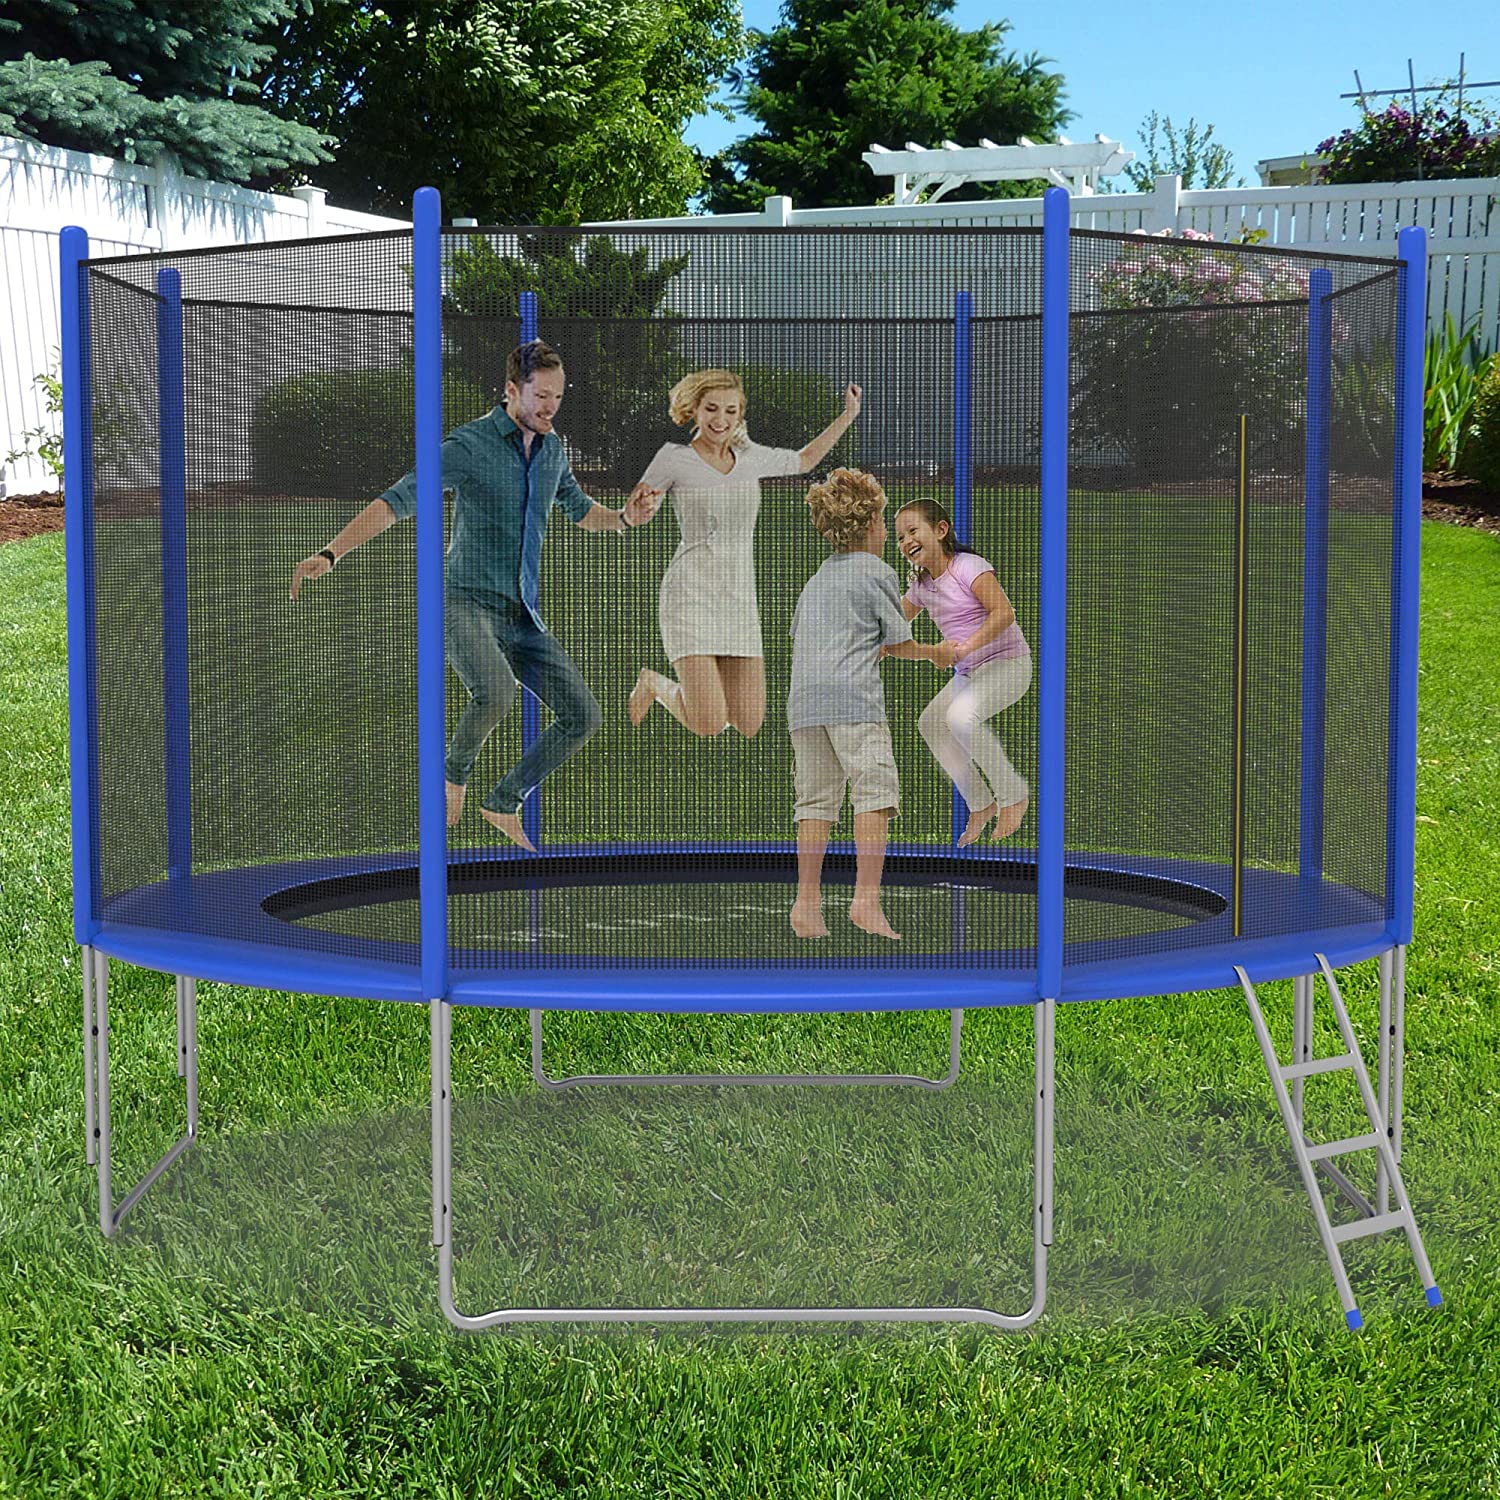 Trampoline for Kids and Family - 10 FT Recreational Trampoline with Safety Enclosure Net and Ladder and Spring Cover - Outdoor Backyard Bounce Jump Have Fun